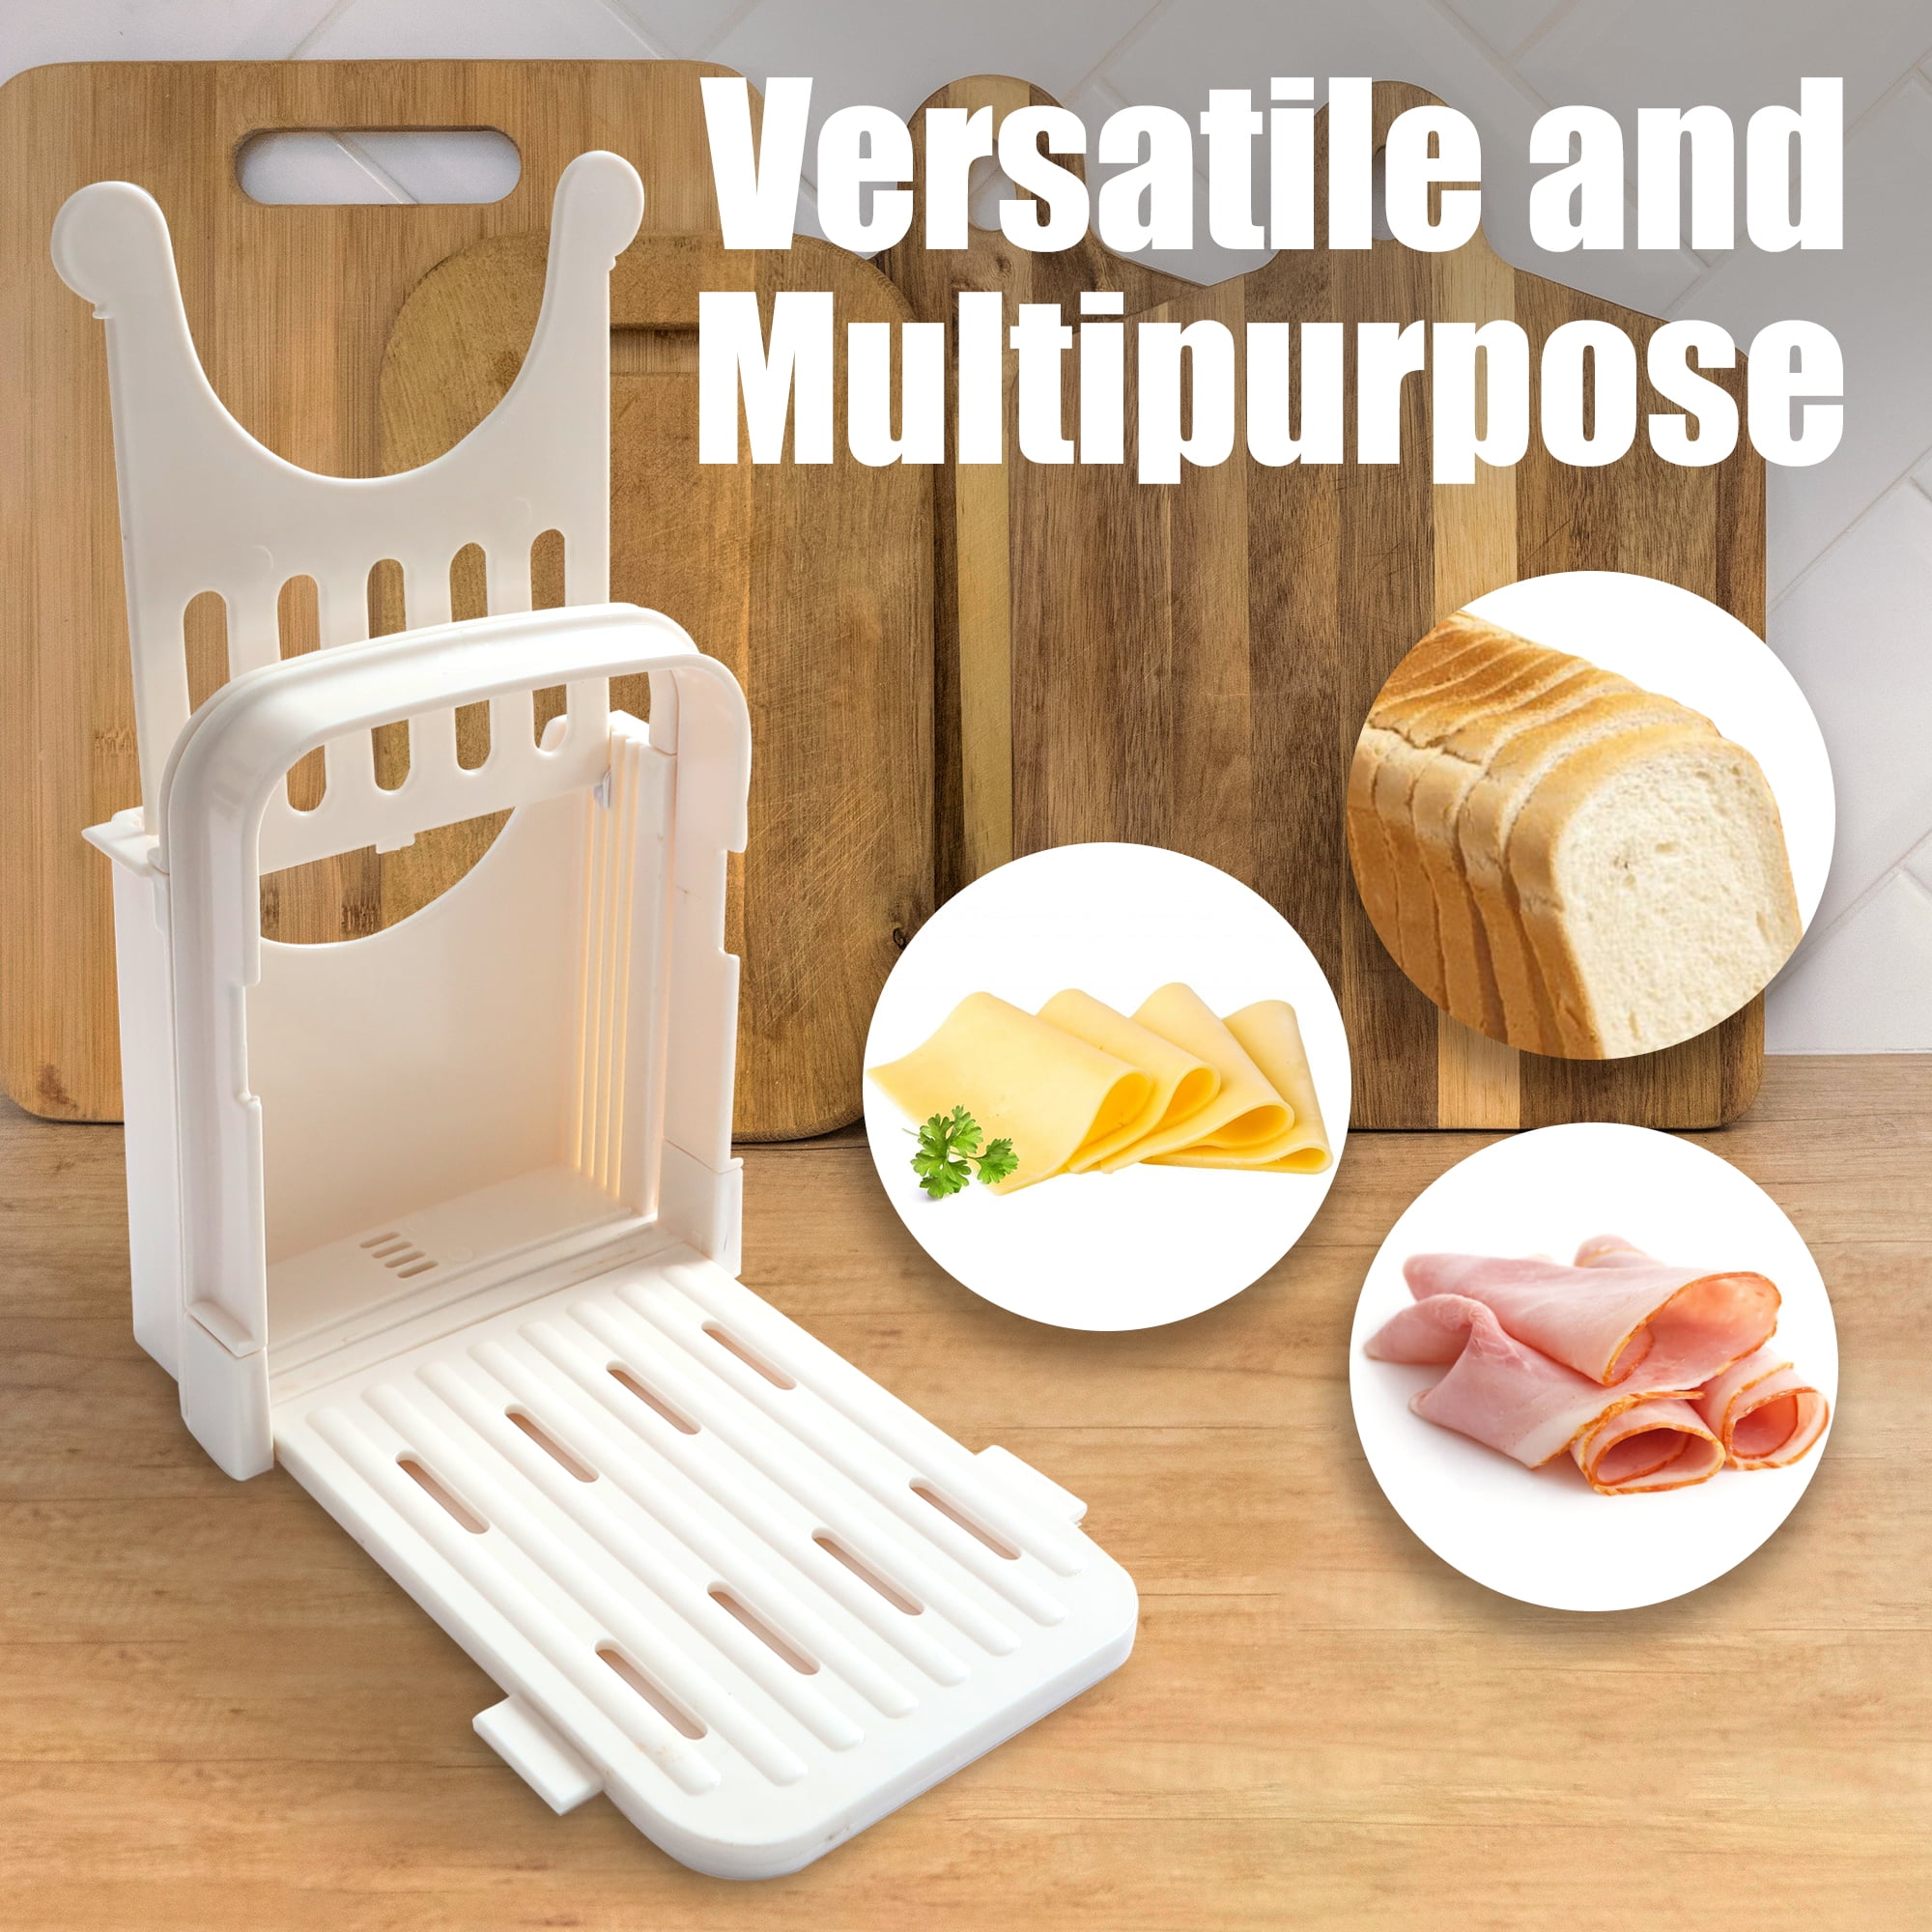 Bread Slicer for Homemade Bread, Adjustable Toast Slicing Guide, Slices  Evenly Loaf Cutting Guide, Foldable Sandwich Bagel Cutter Machine, 1 Pcs  price in Saudi Arabia, Noon Saudi Arabia